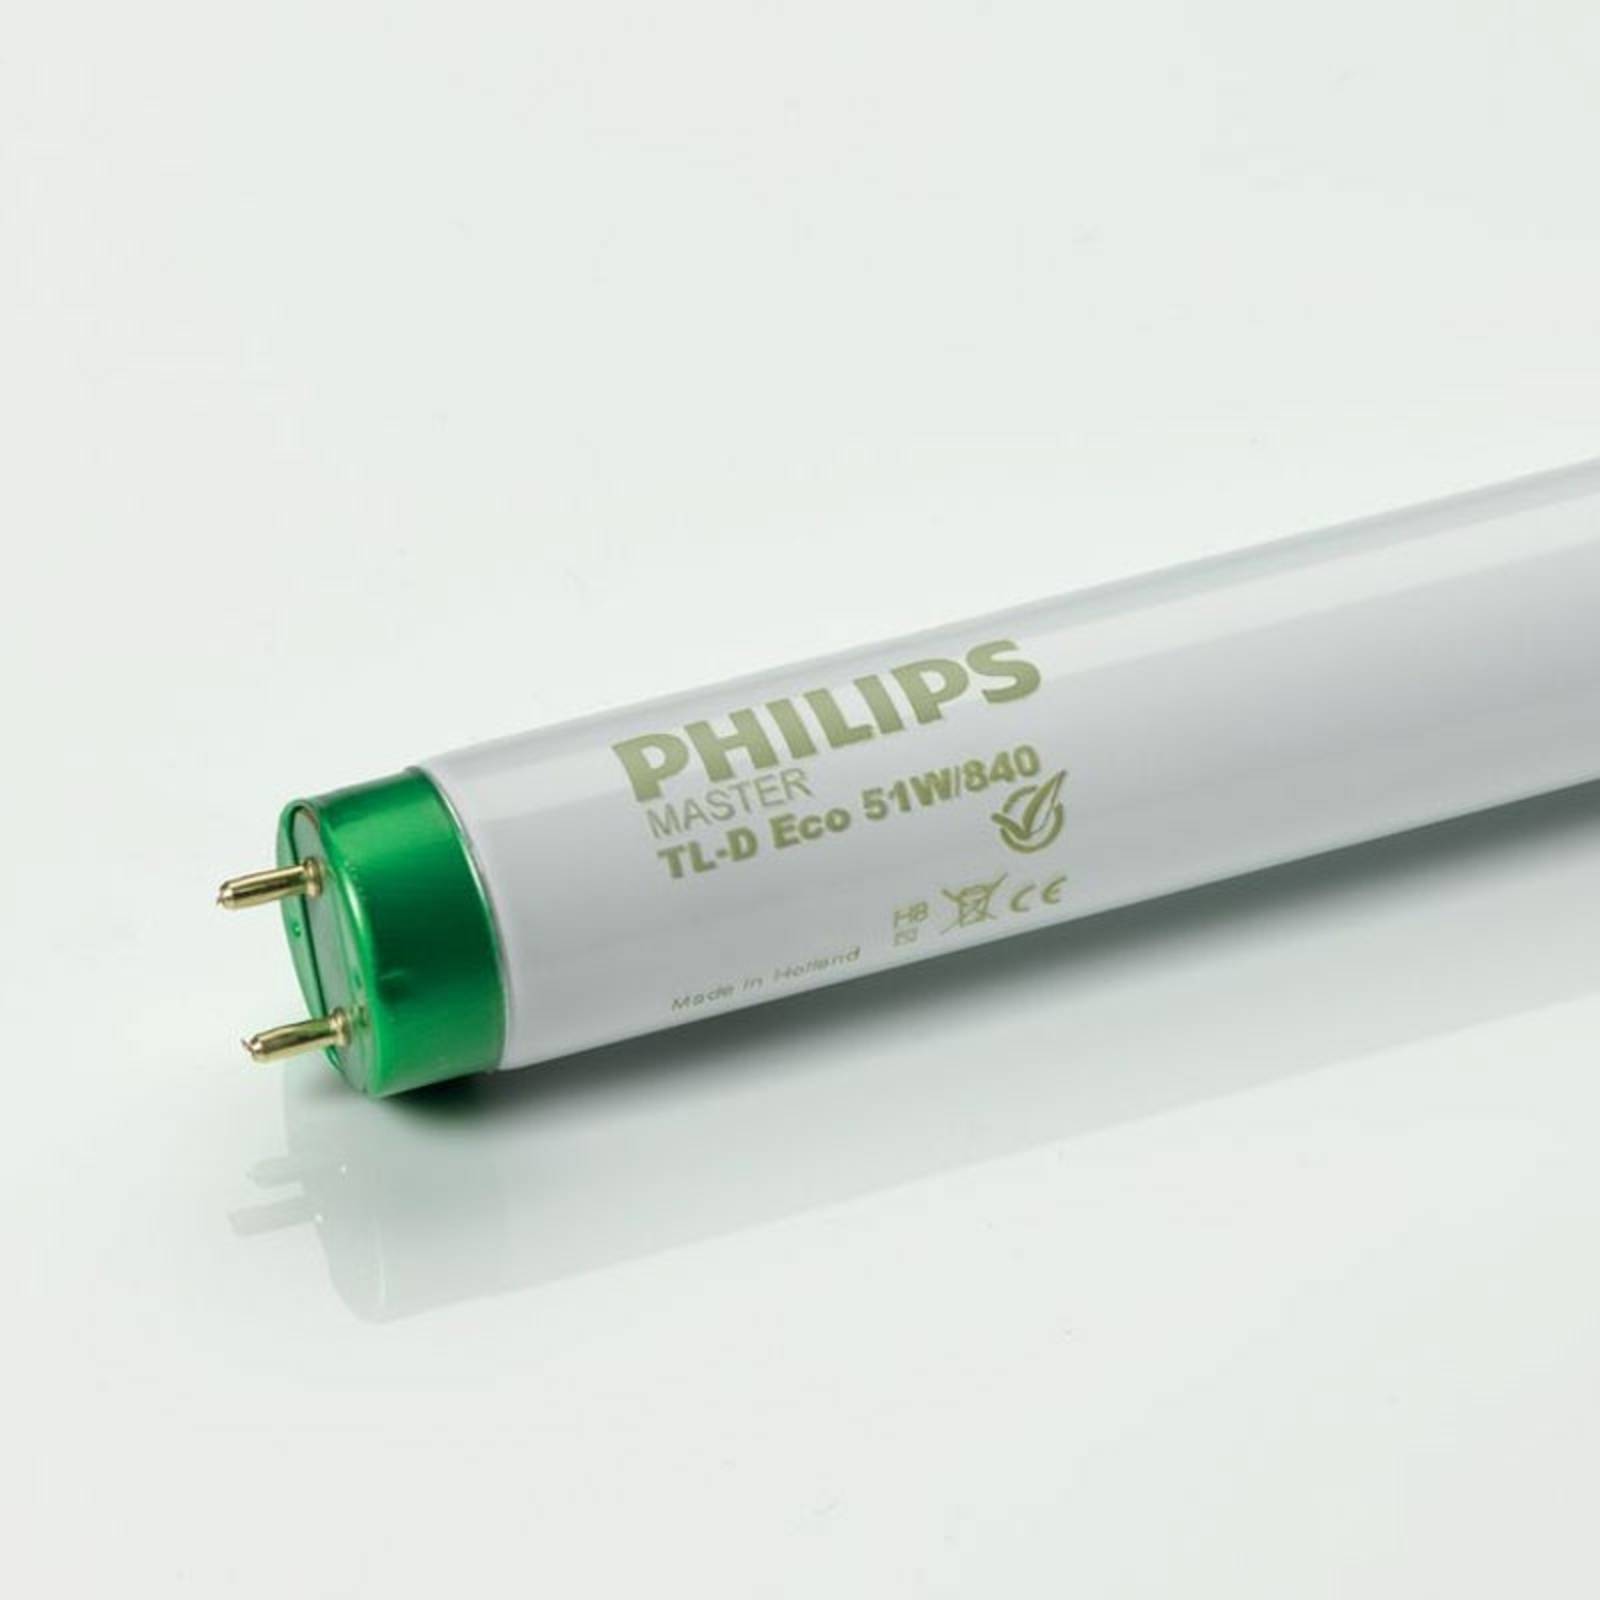 Philips Leuchtstoffröhre G13 T8 Master TL-D Eco 865 51W